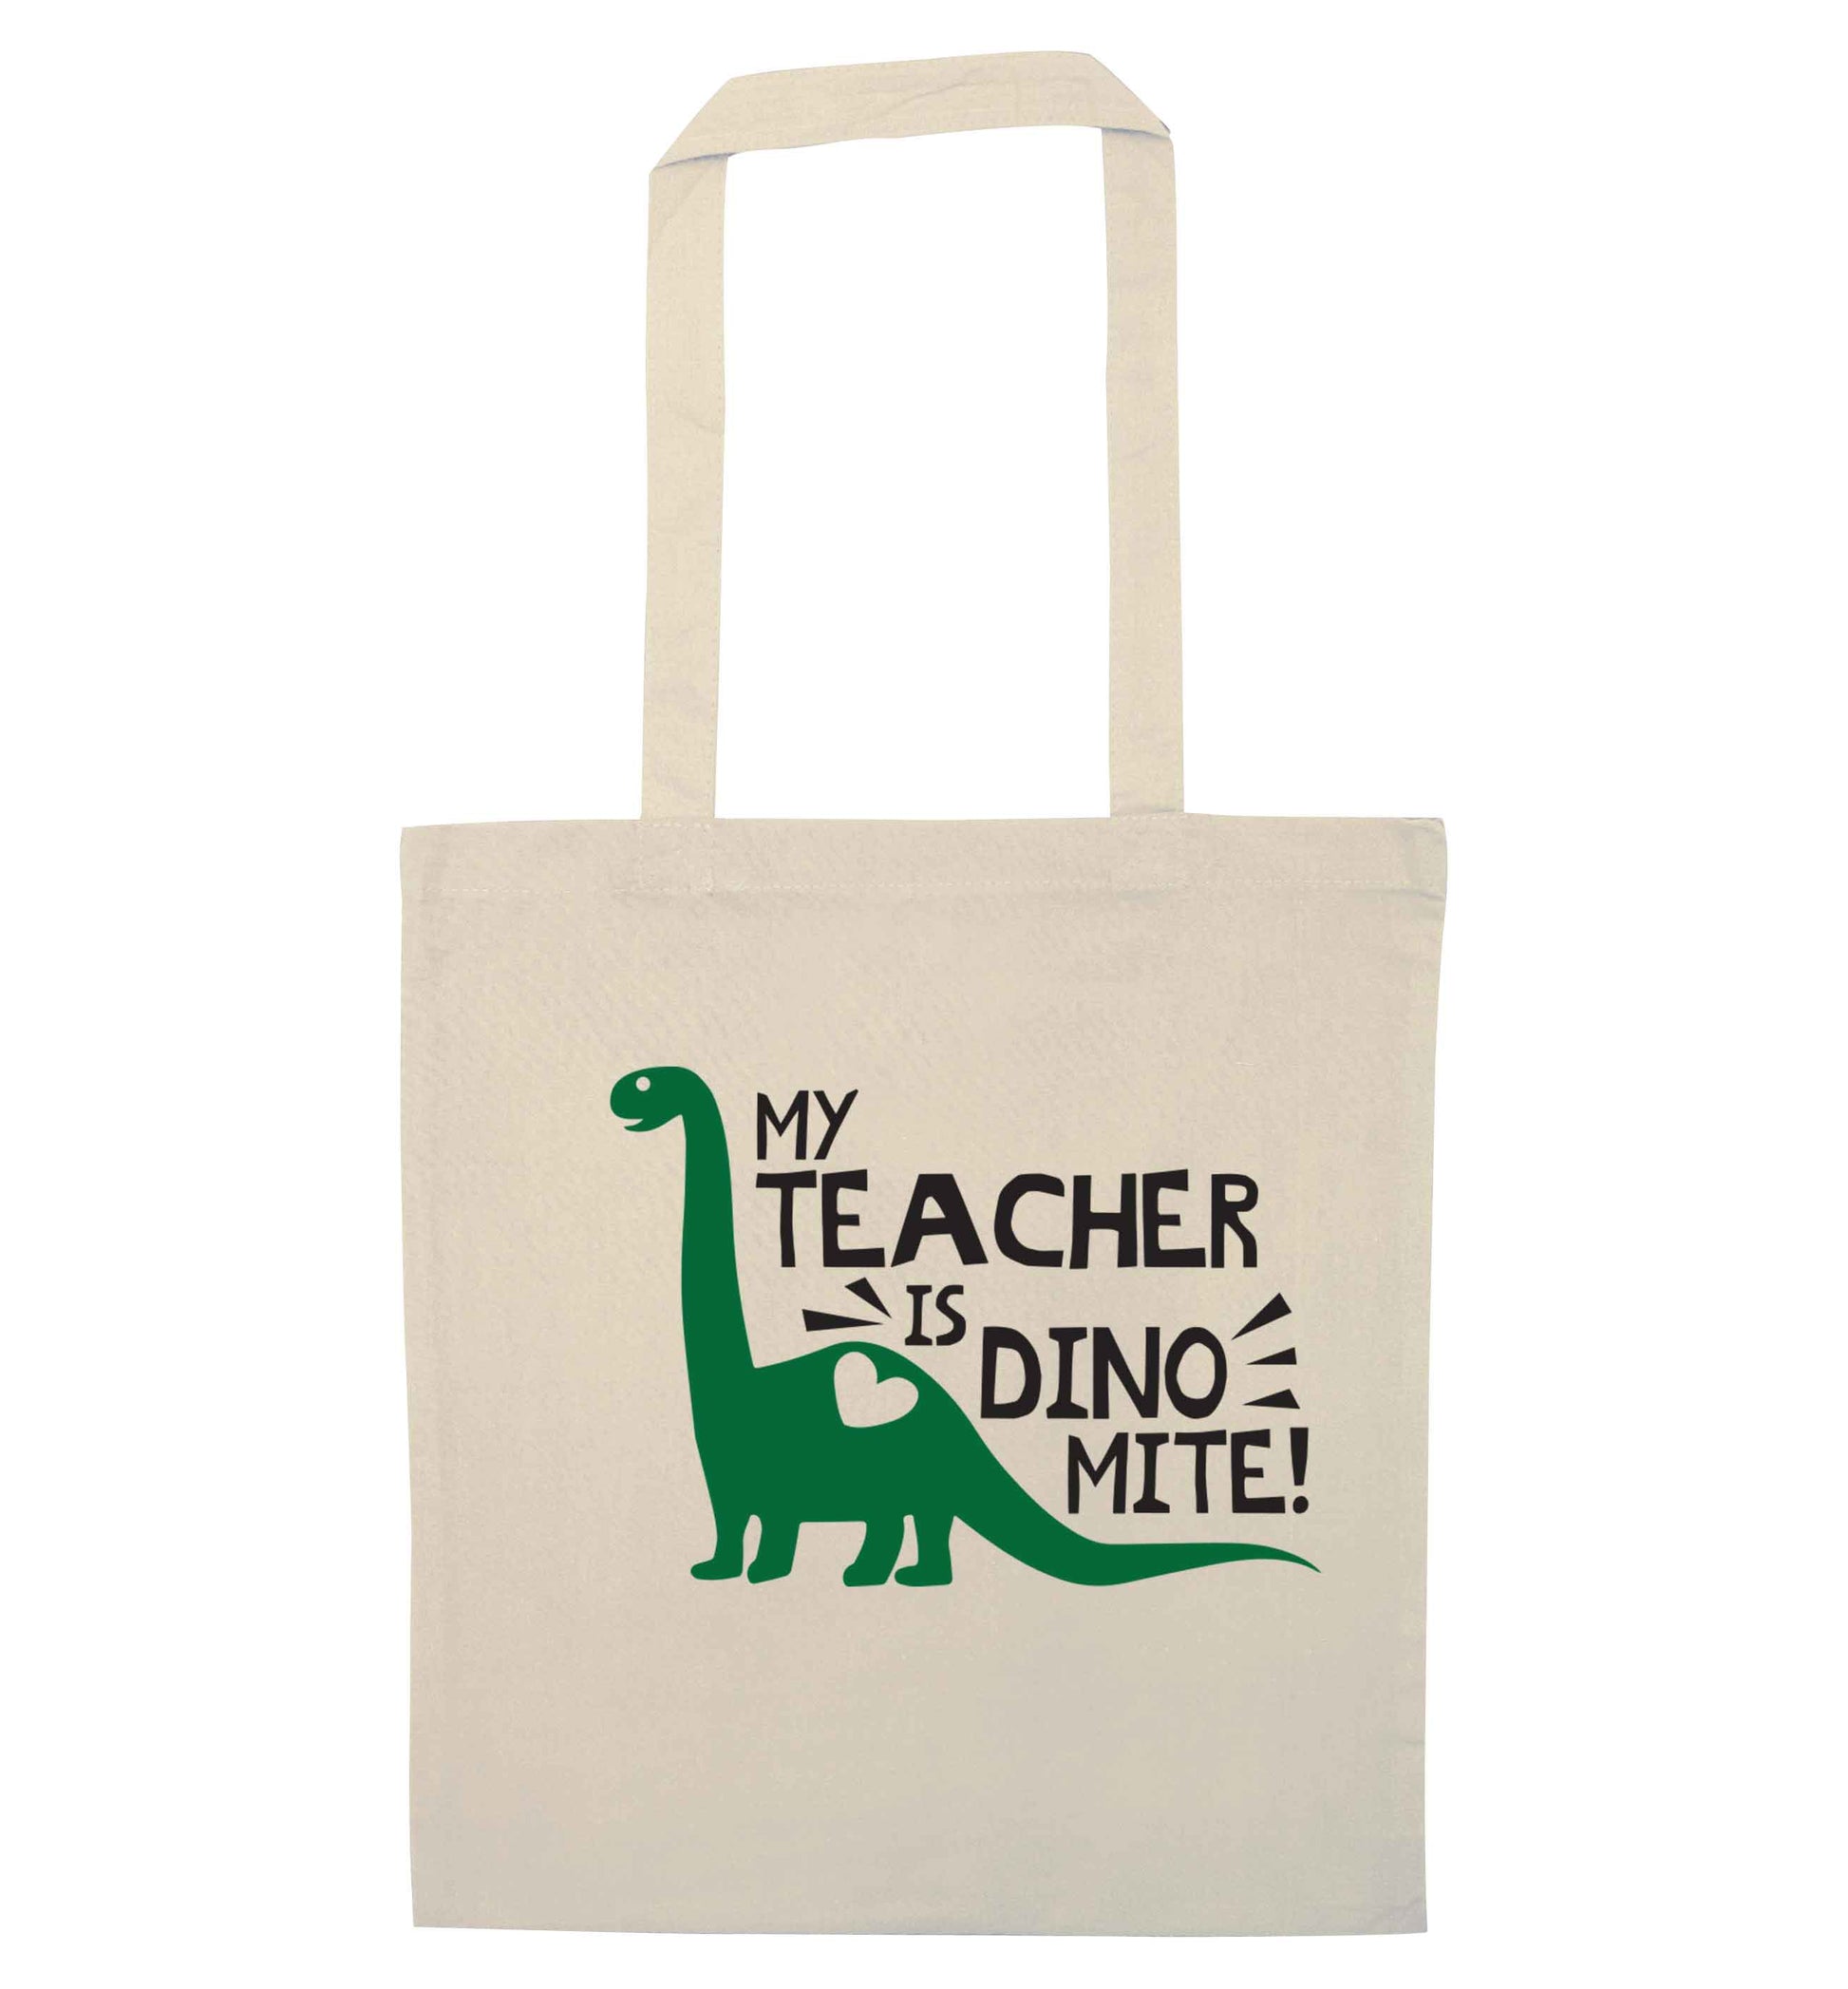 My teacher is dinomite! natural tote bag